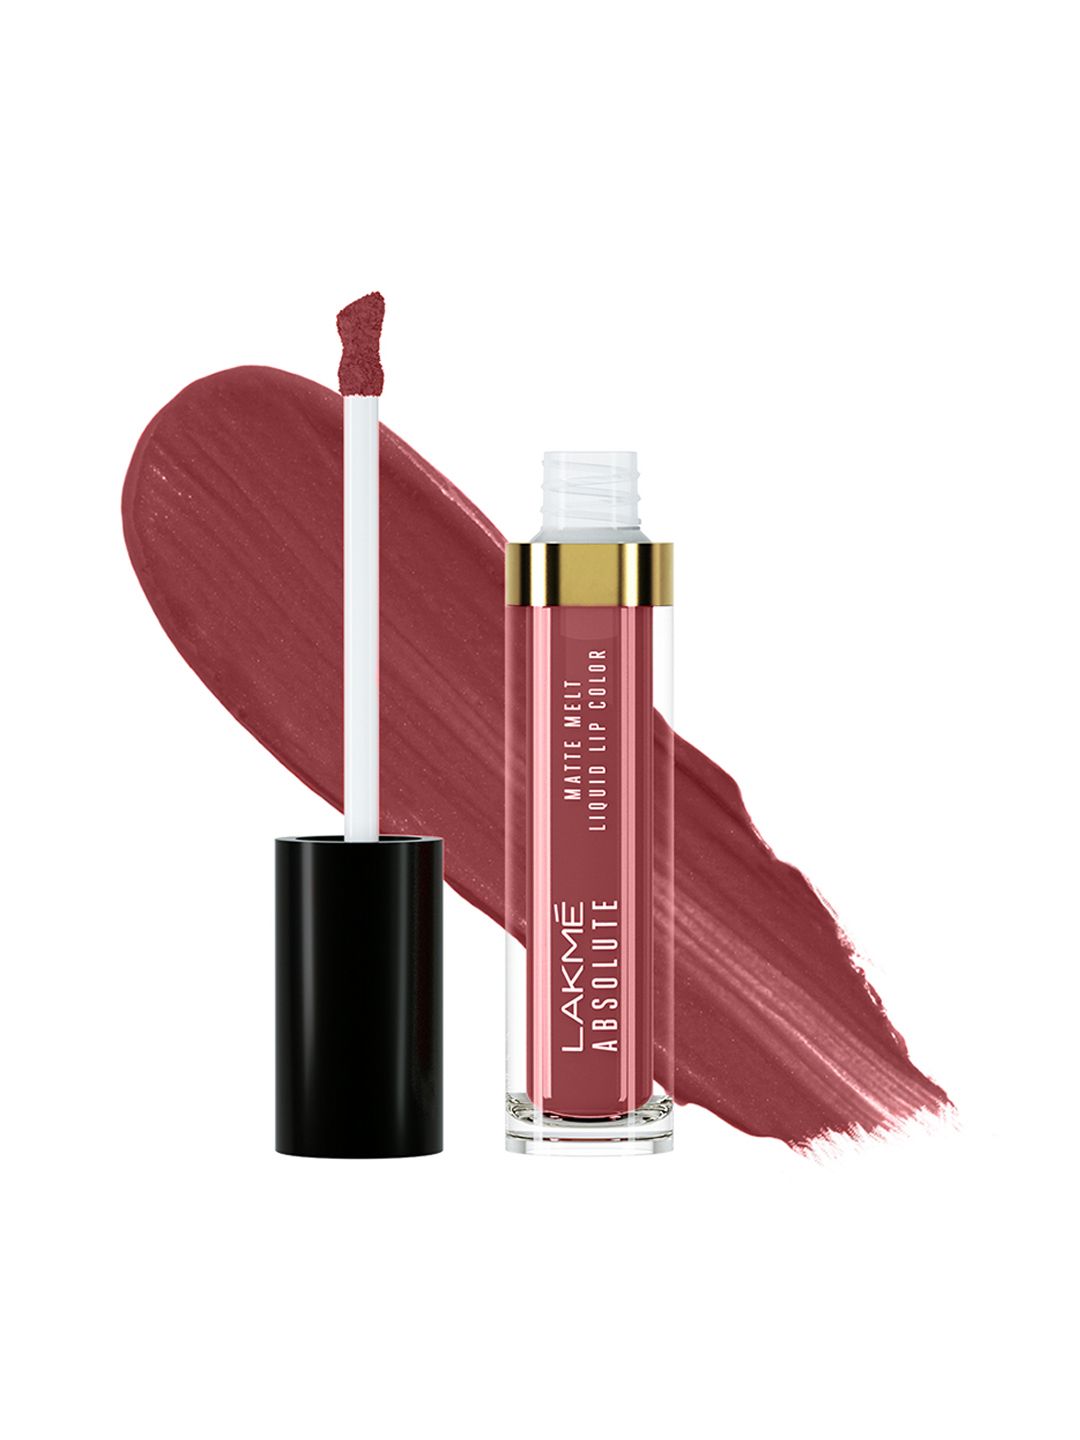 Lakme Absolute Matte Melt Liquid Lip Color - 333 Pink Silk Price in India